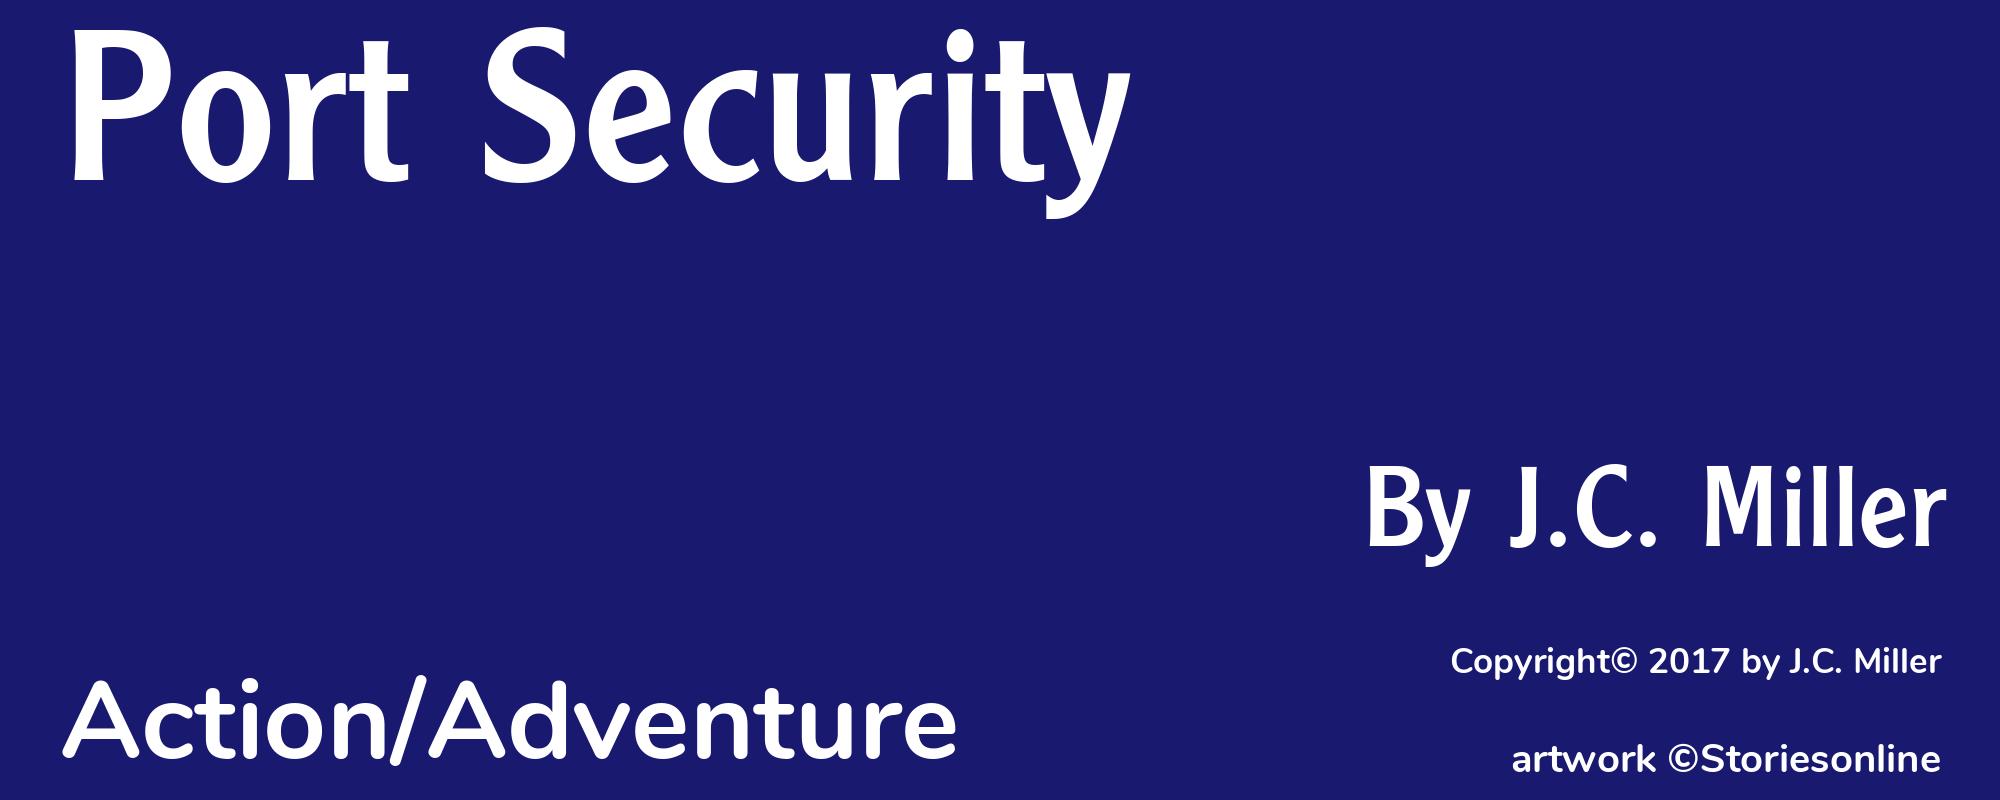 Port Security - Cover